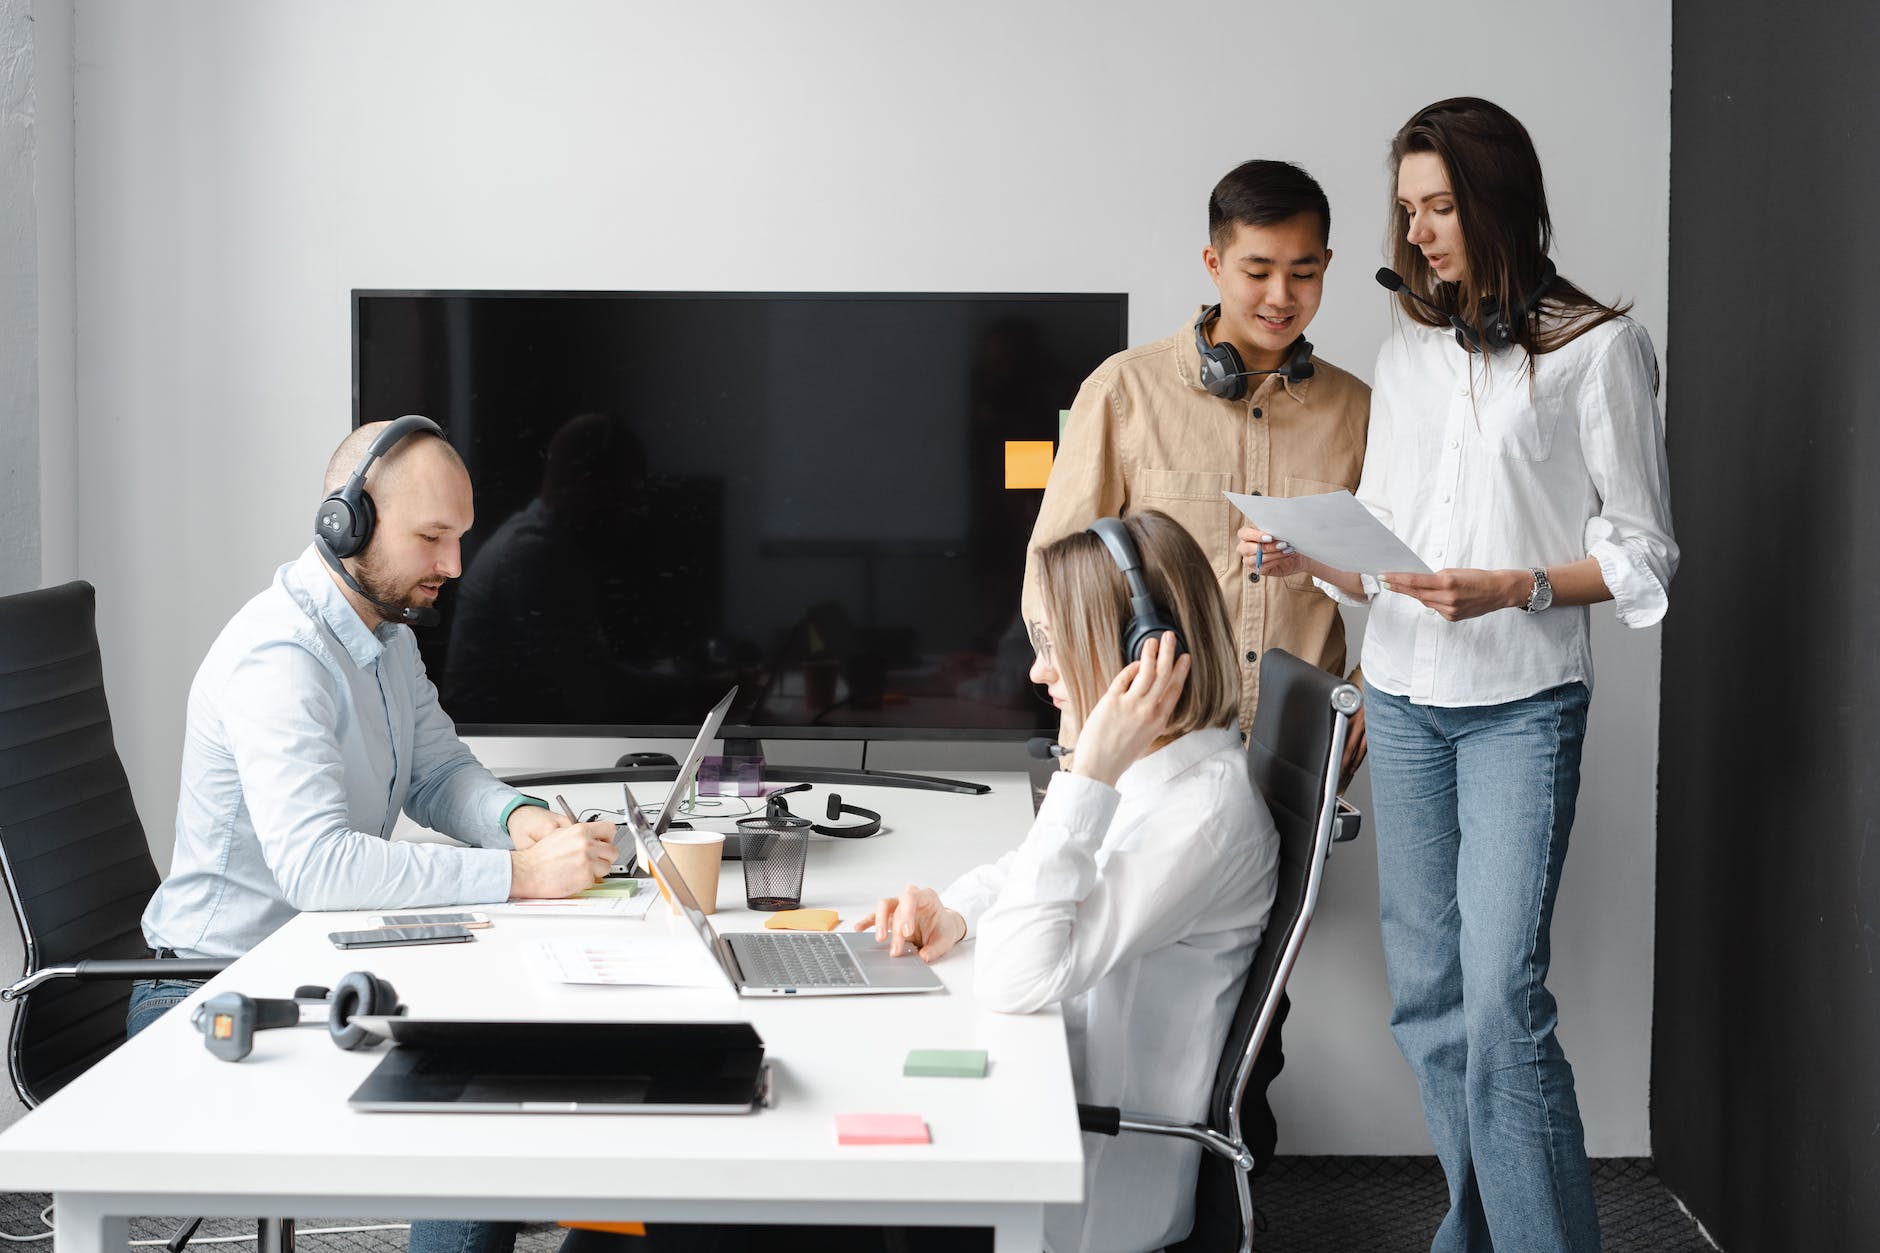 photo of a group of people with headsets in an office